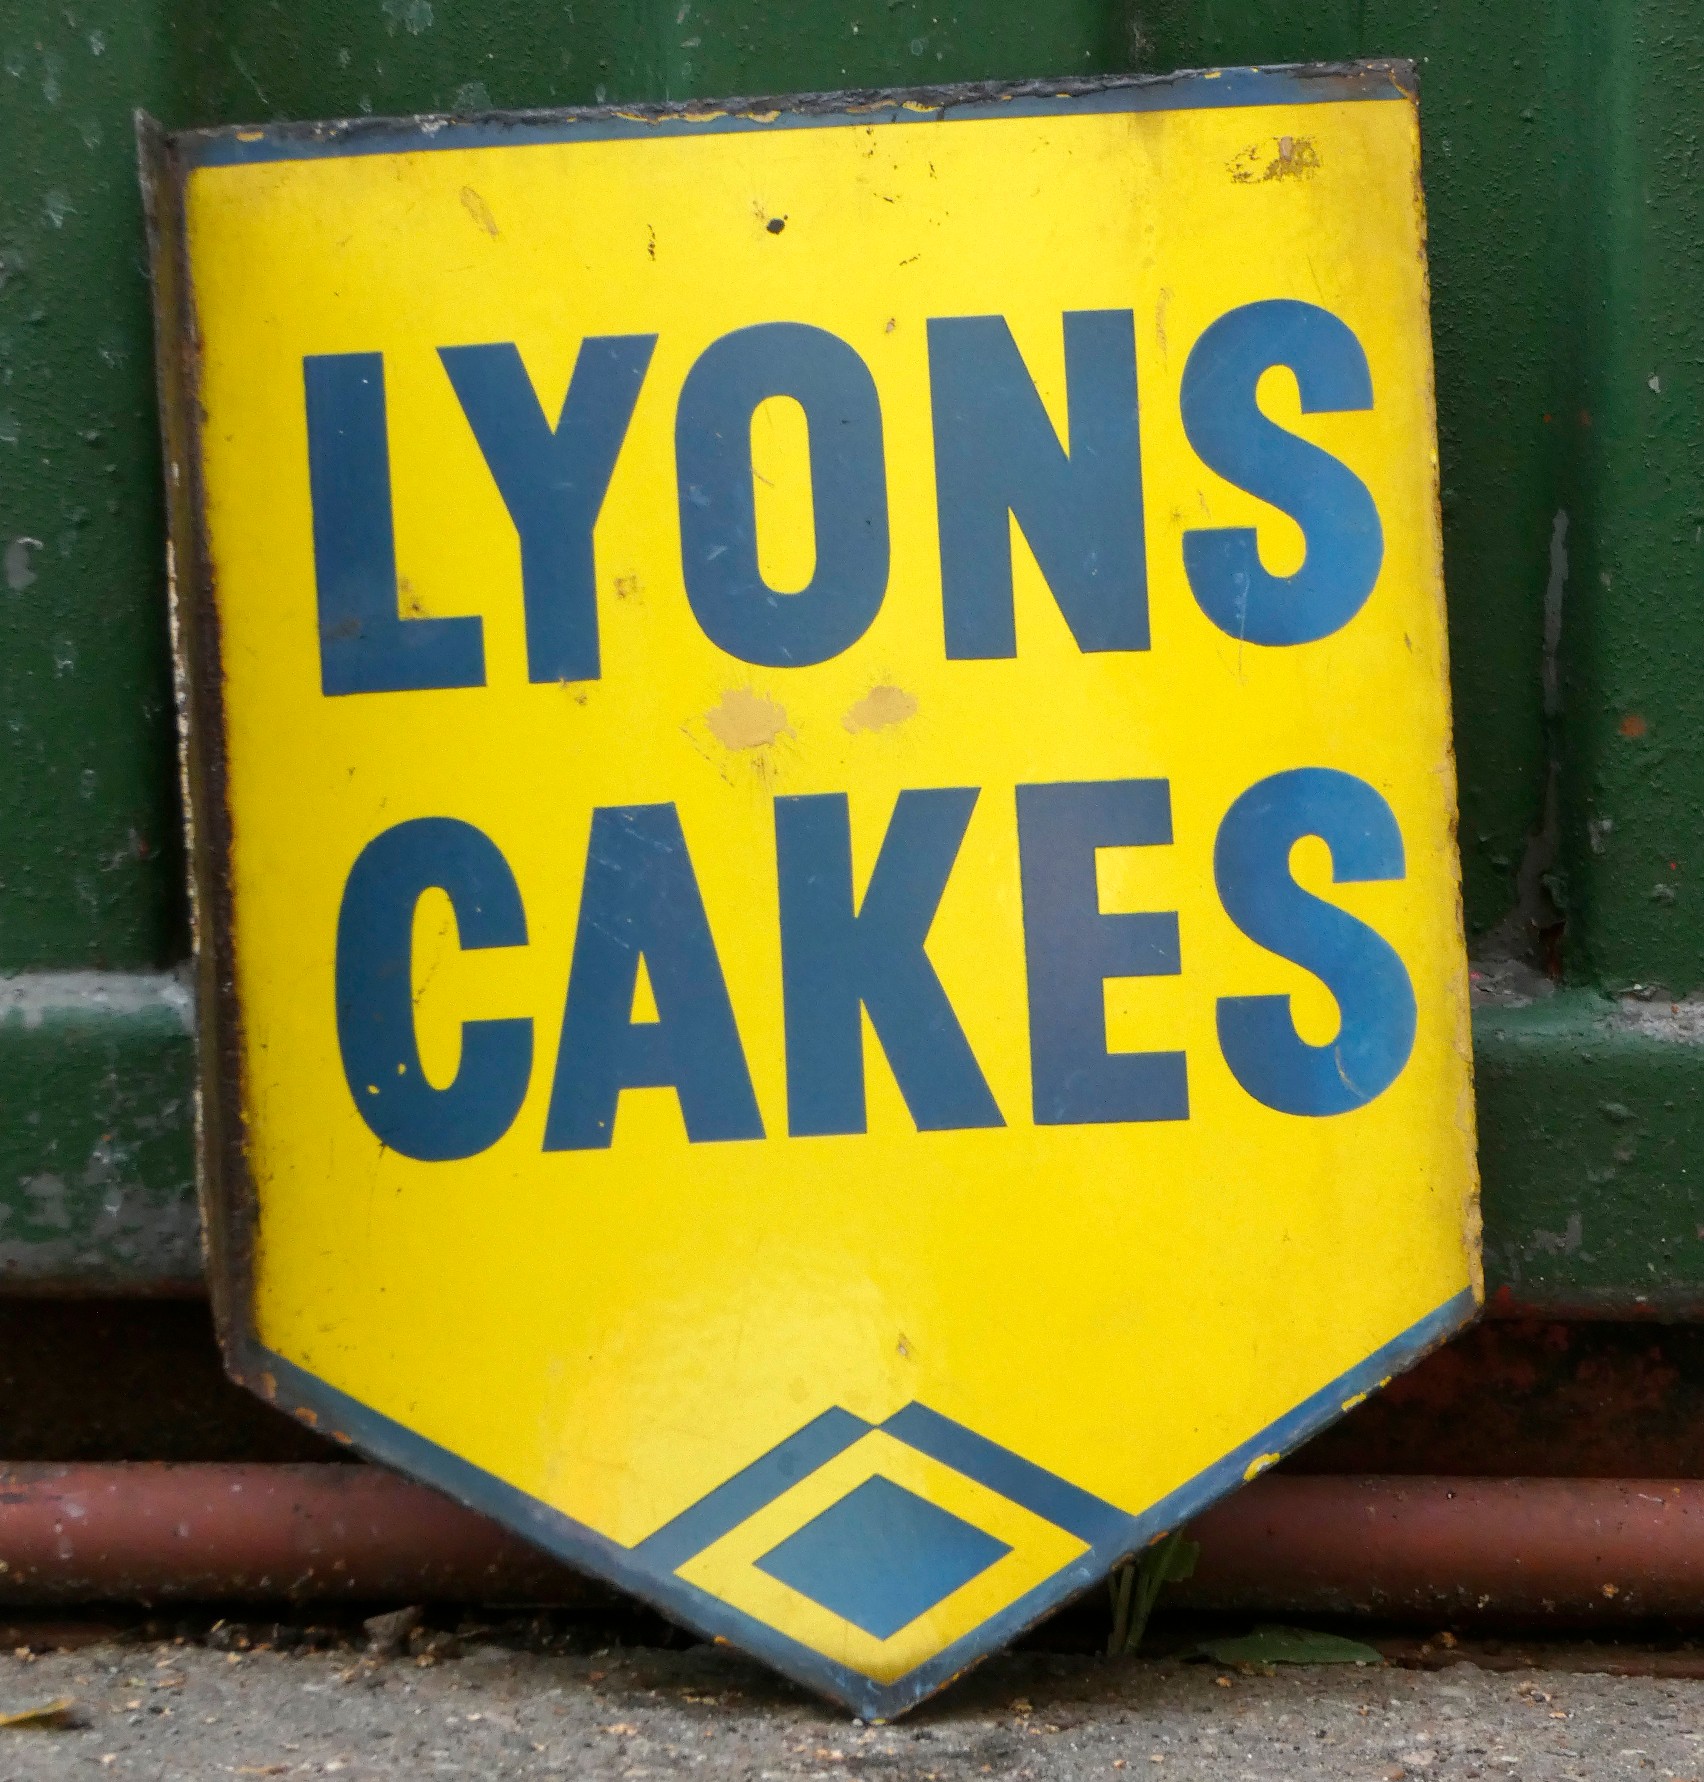 Lyons Cakes, a double sided wall mounted vitreous enamel advertising sign, 40 x 30cm. - Image 3 of 3